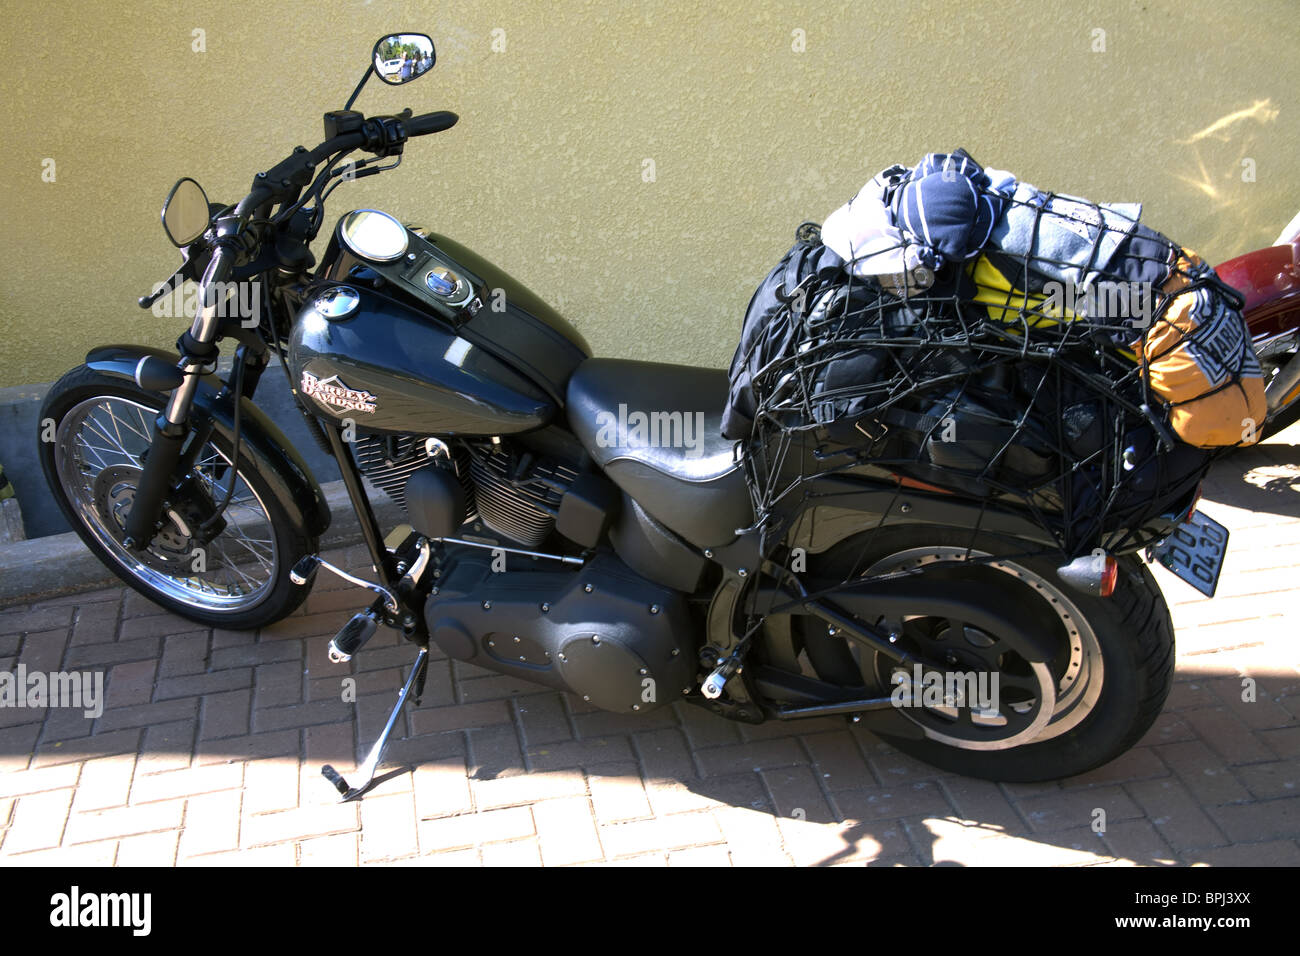 Harley Davidson motorbike packed with luggage for traveling Stock Photo